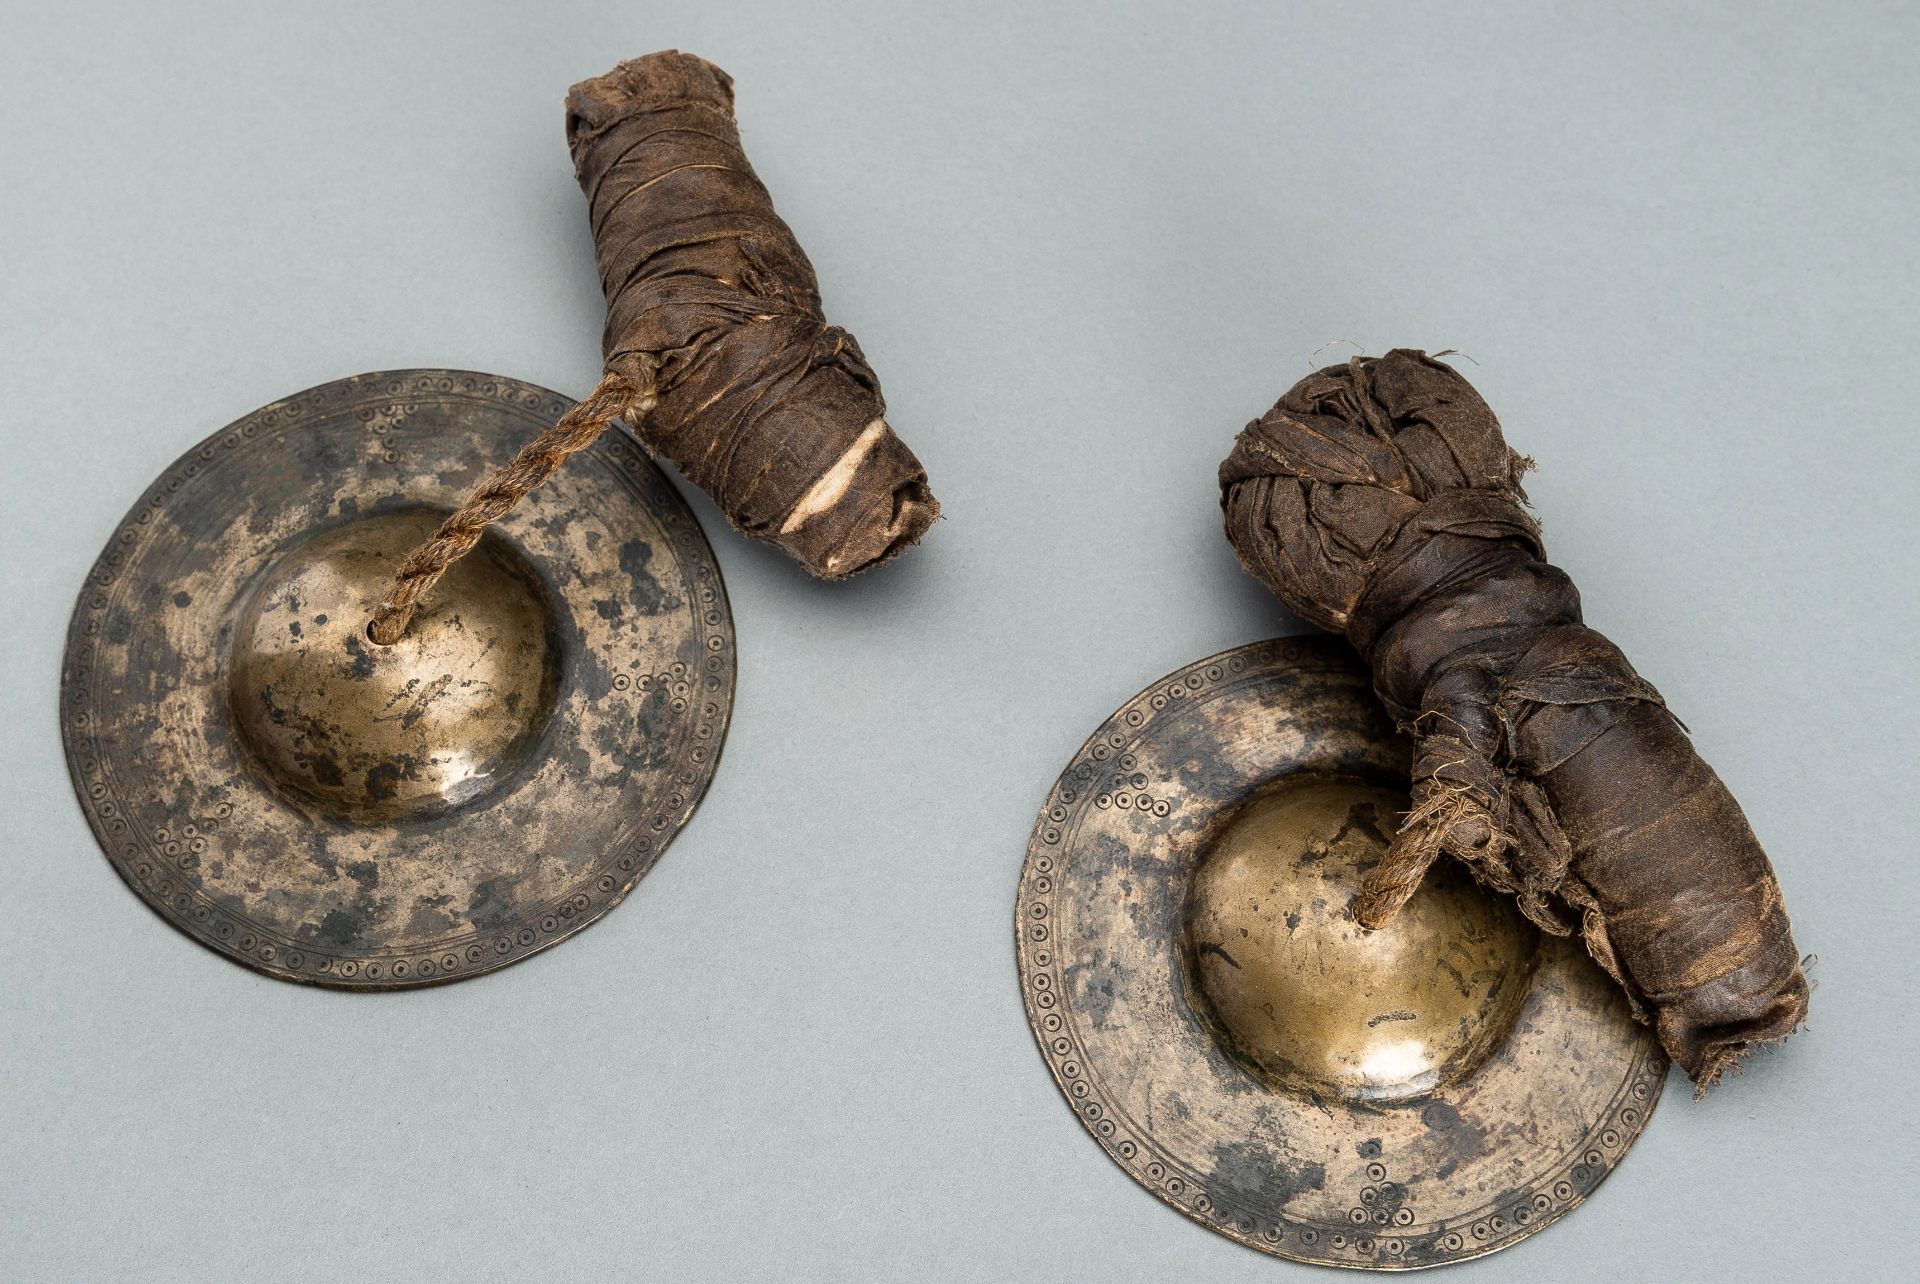 A RARE PAIR OF BRONZE CYMBALS, 19th CENTURY